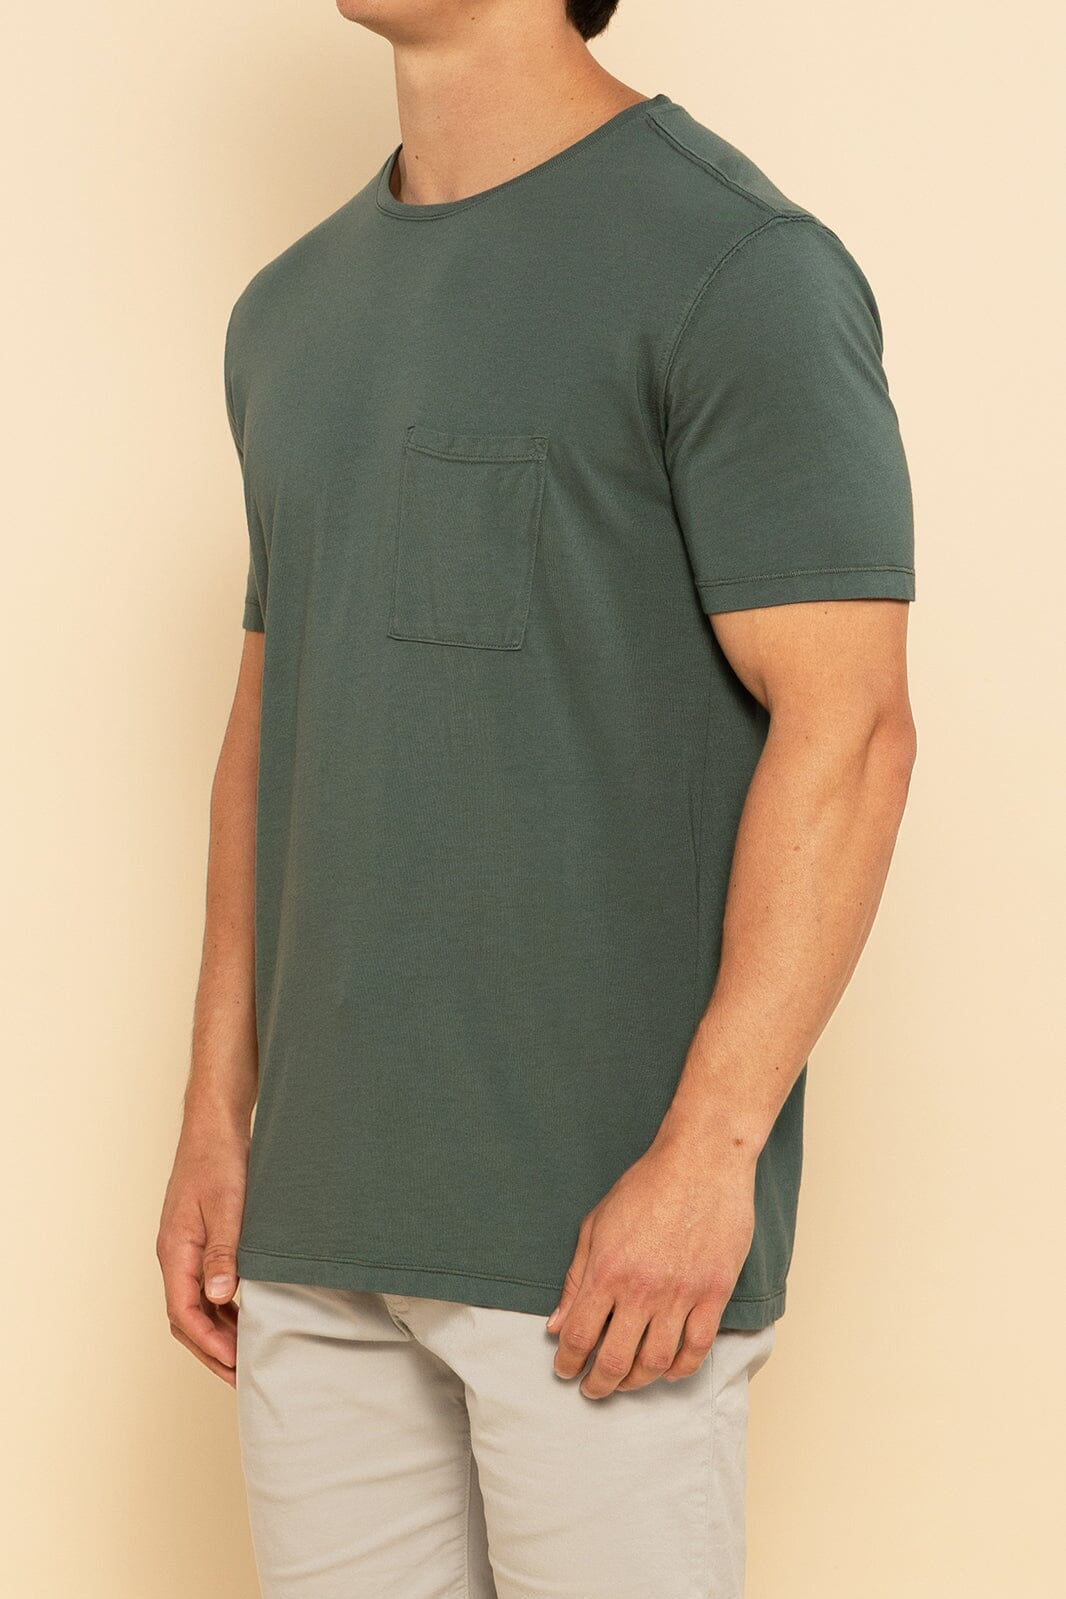 Navy Green Pocket Crew Neck Tee With Pocket For Men - Front Side Angle